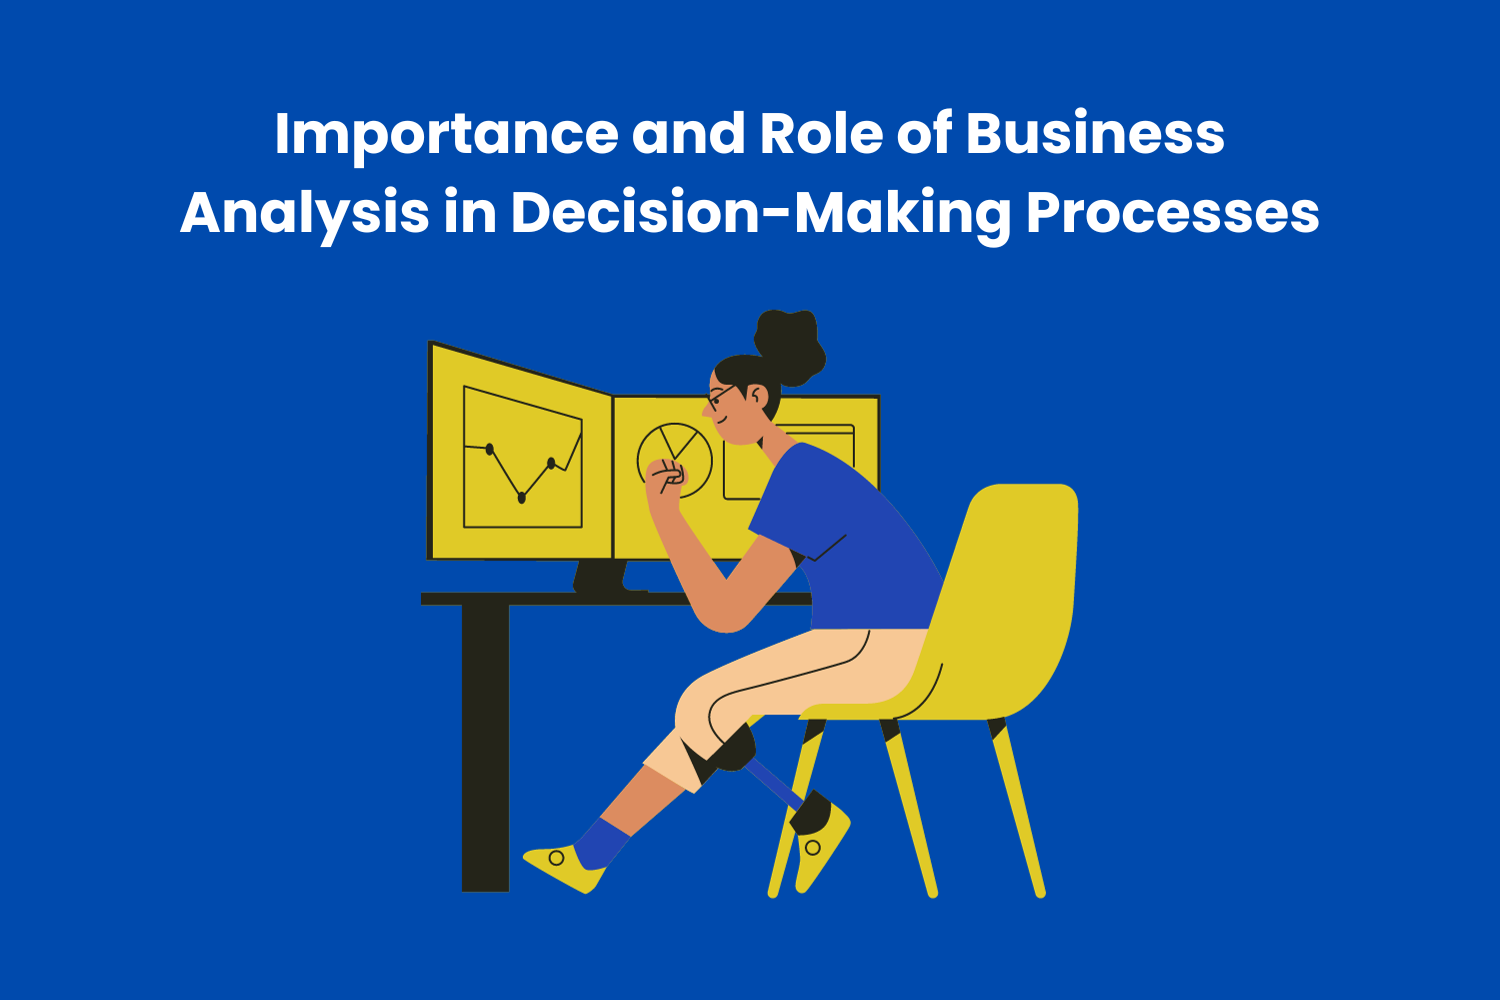 Importance and Role of Business Analysis in Decision-Making Processes